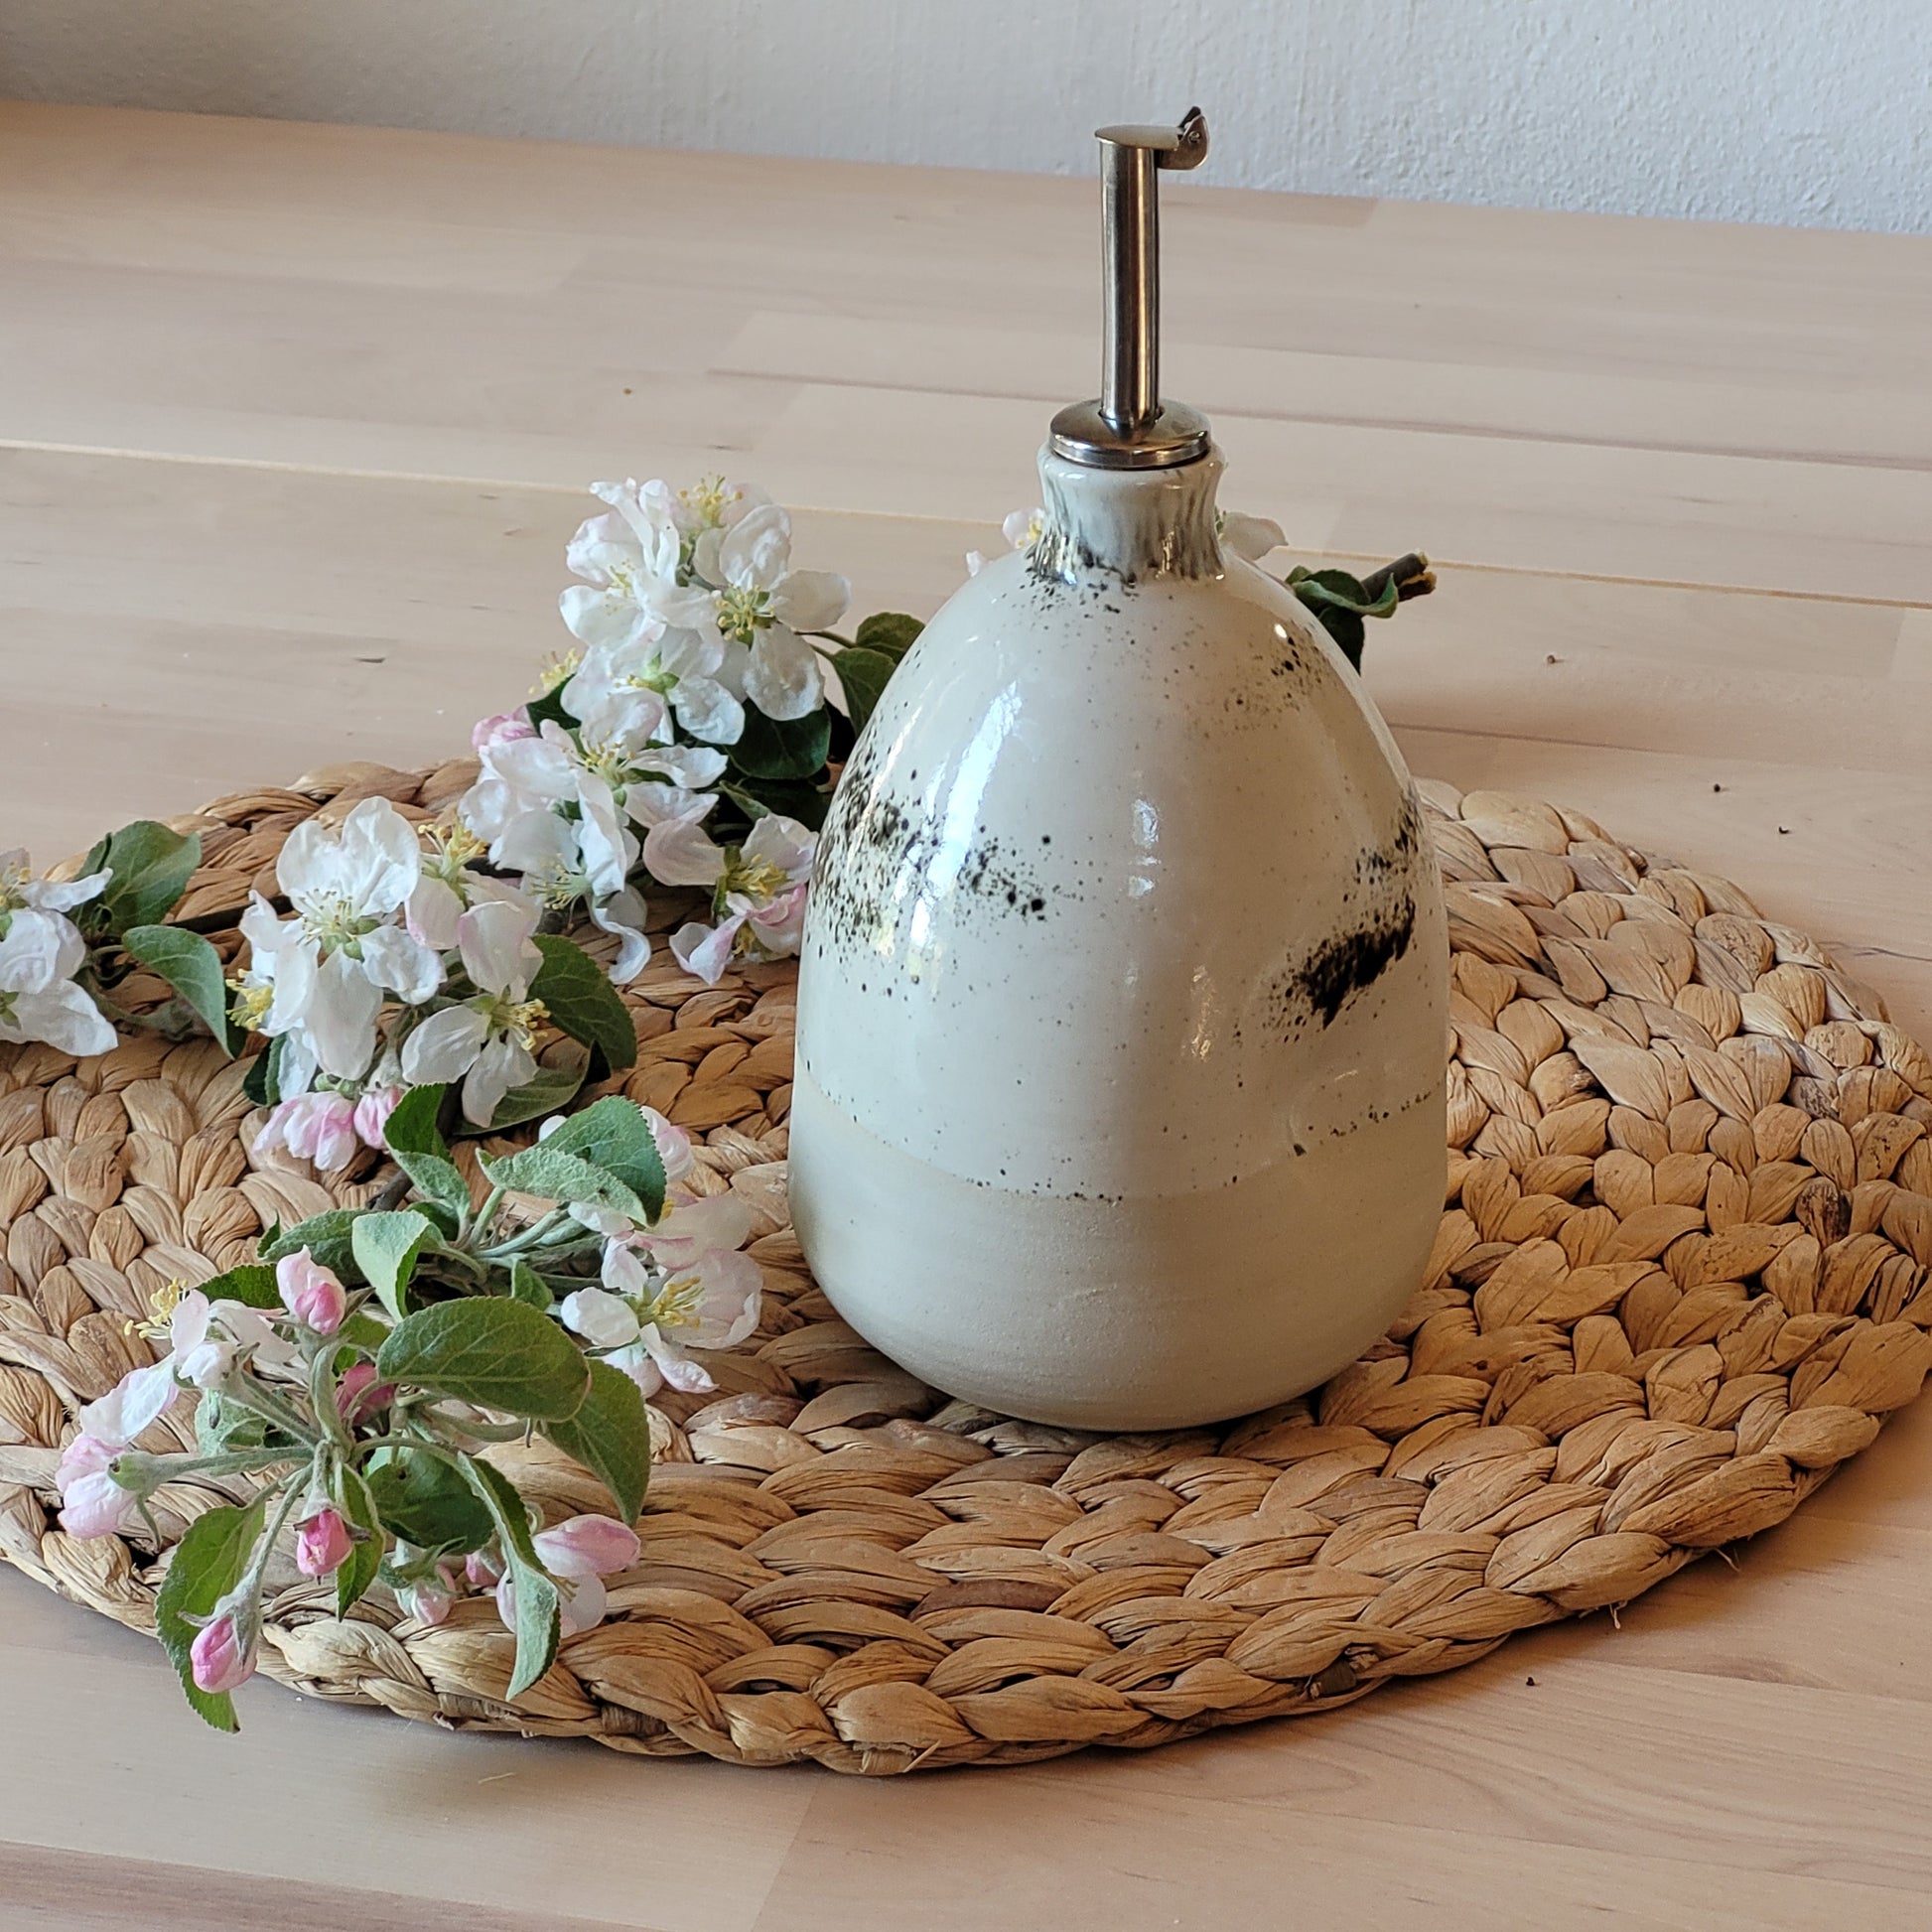 Multifunctional ceramic vinegar/oil bottle, also usable as a charming vase or homely ornament. Crafted with love and care in a small pottery studio in Latvia, ensuring each piece is one-of-a-kind.